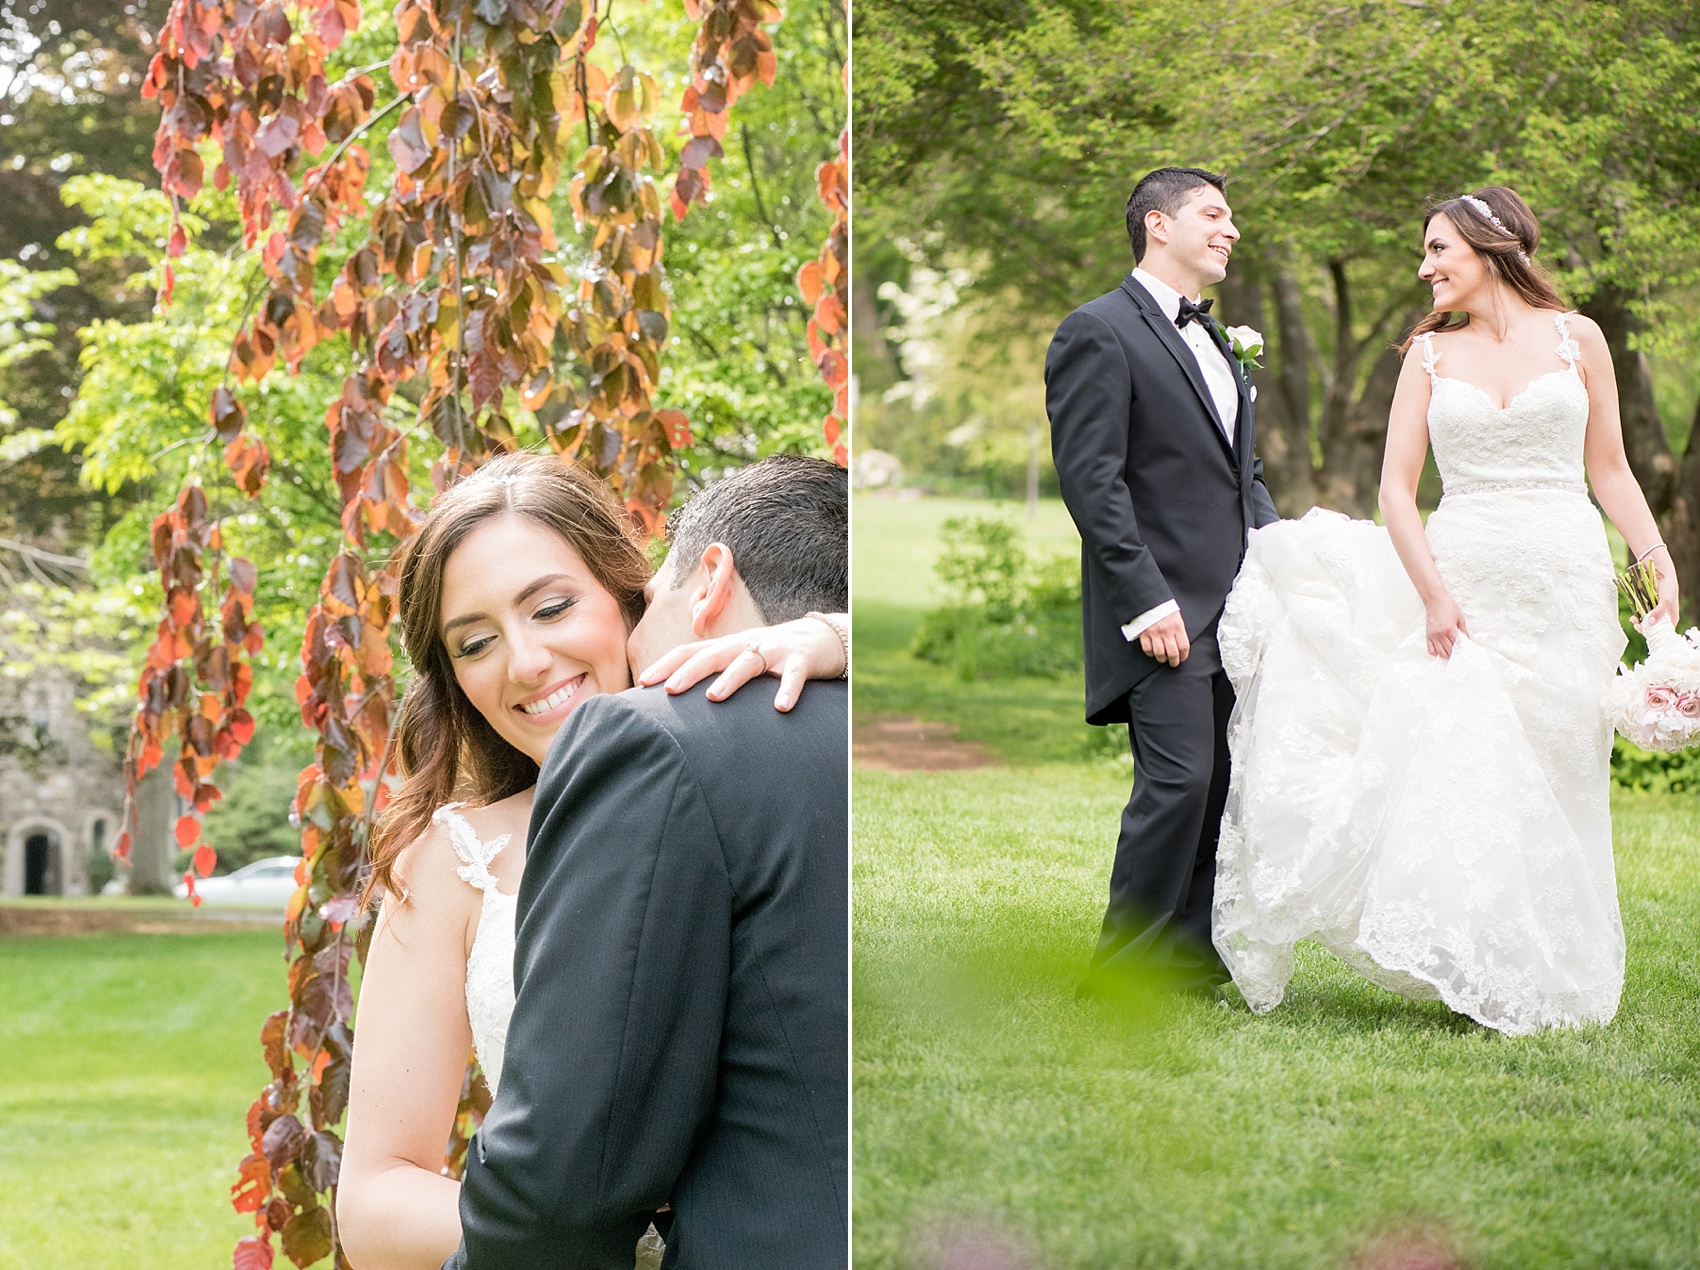 Bride and groom photos at a Skylands Manor wedding. Images by Mikkel Paige Photography, NJ wedding photographer.